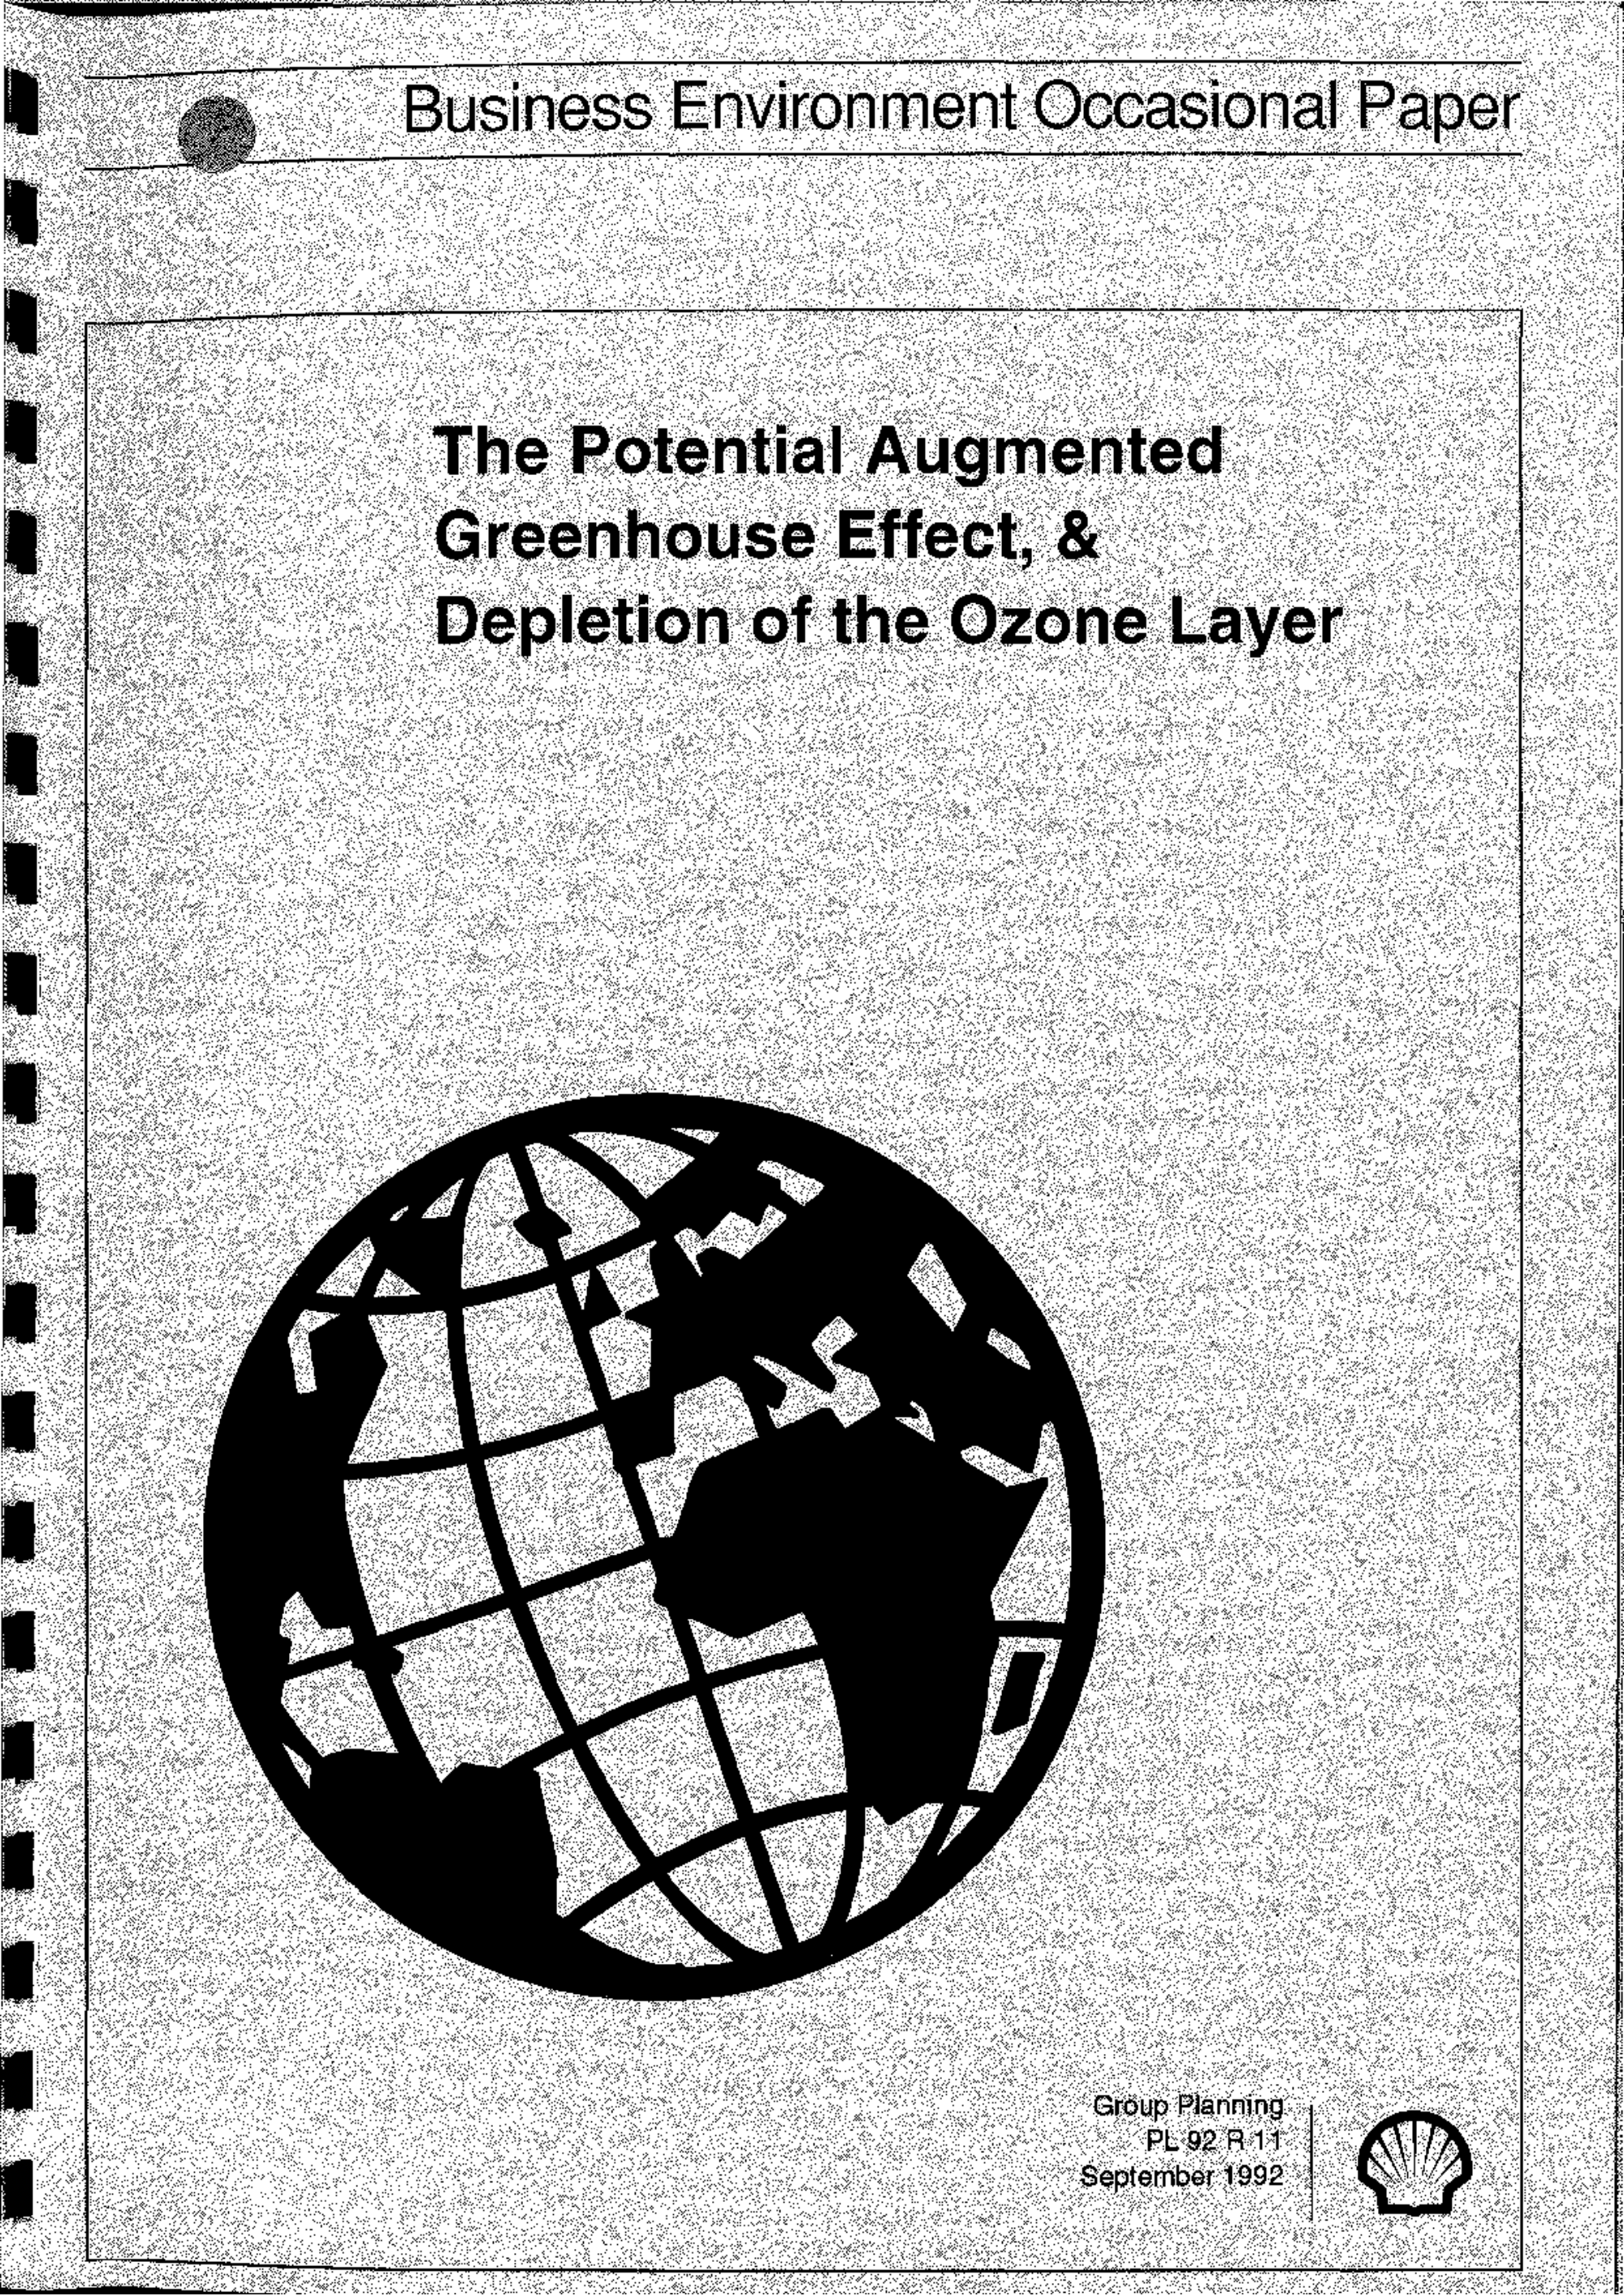 Page 1 of 1992 Internal Shell Group Planning report Potential Augmented Greenhouse Effect and Depletion of the Ozone Layer